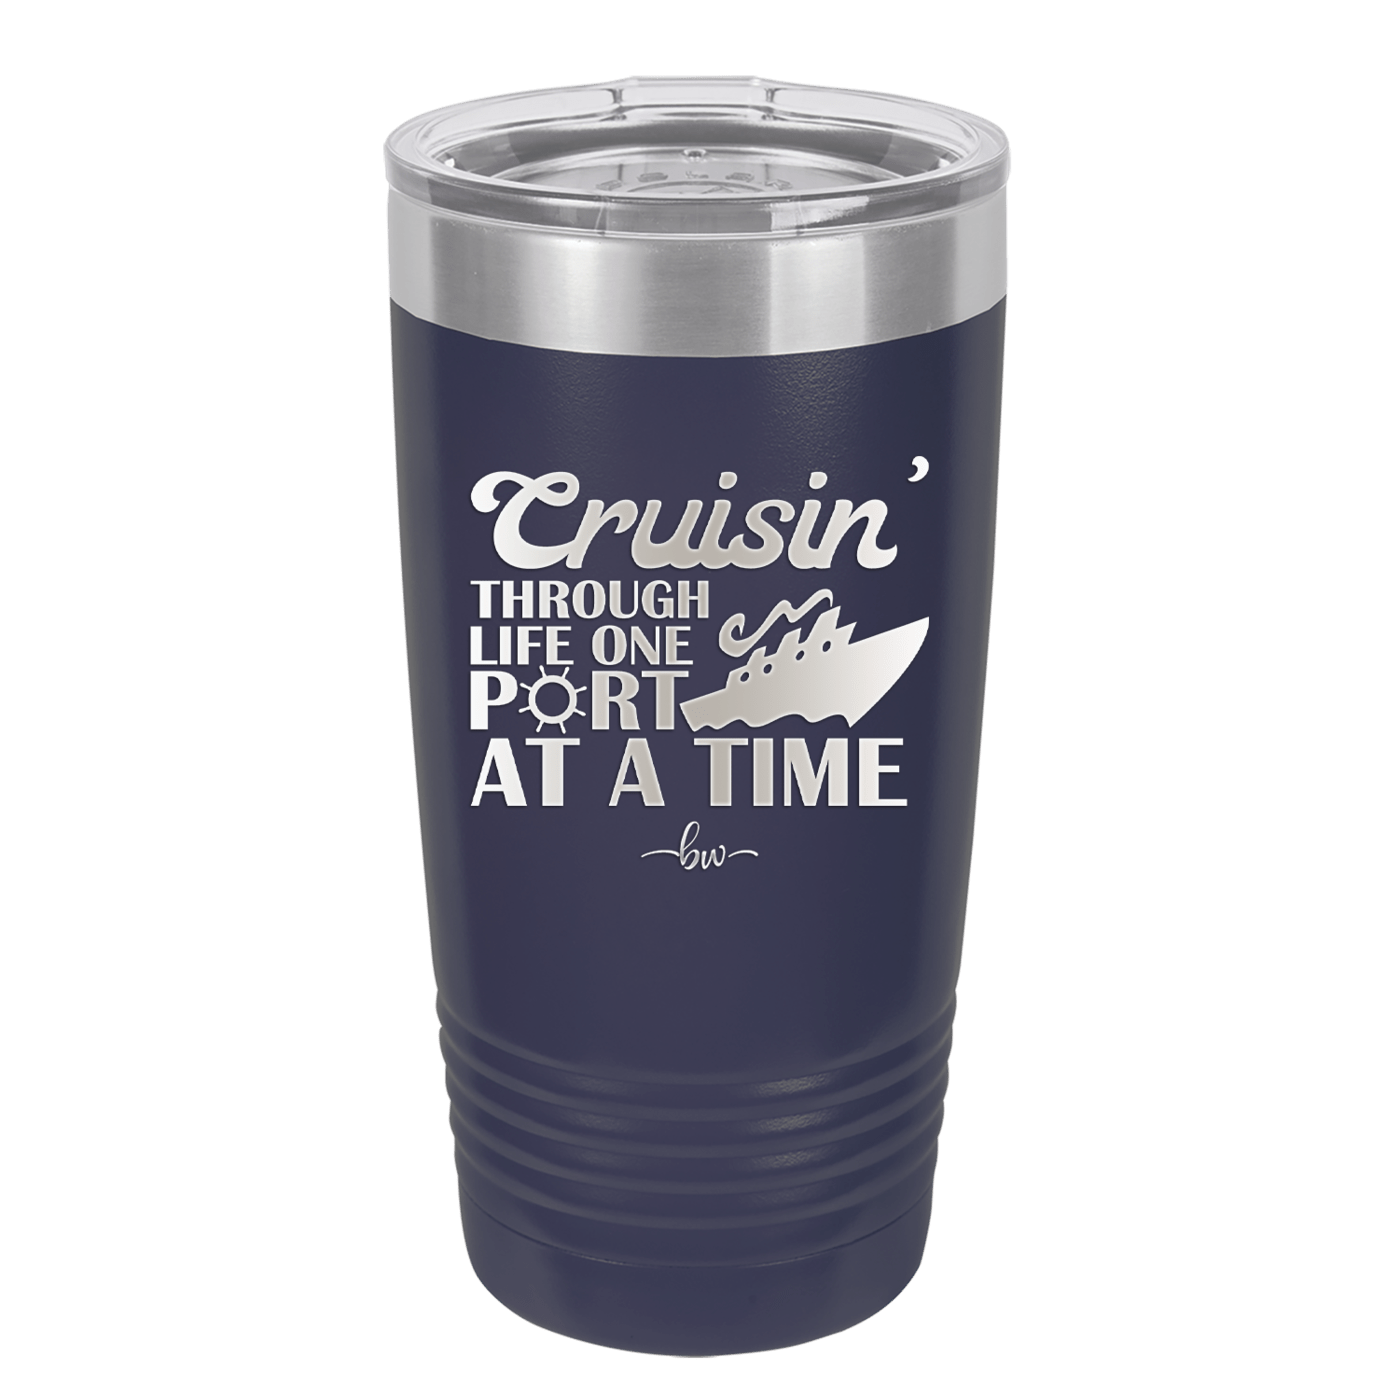 Cruisin Through Life One Port at a Time Cruise 1 - Laser Engraved Stainless Steel Drinkware - 1447 -